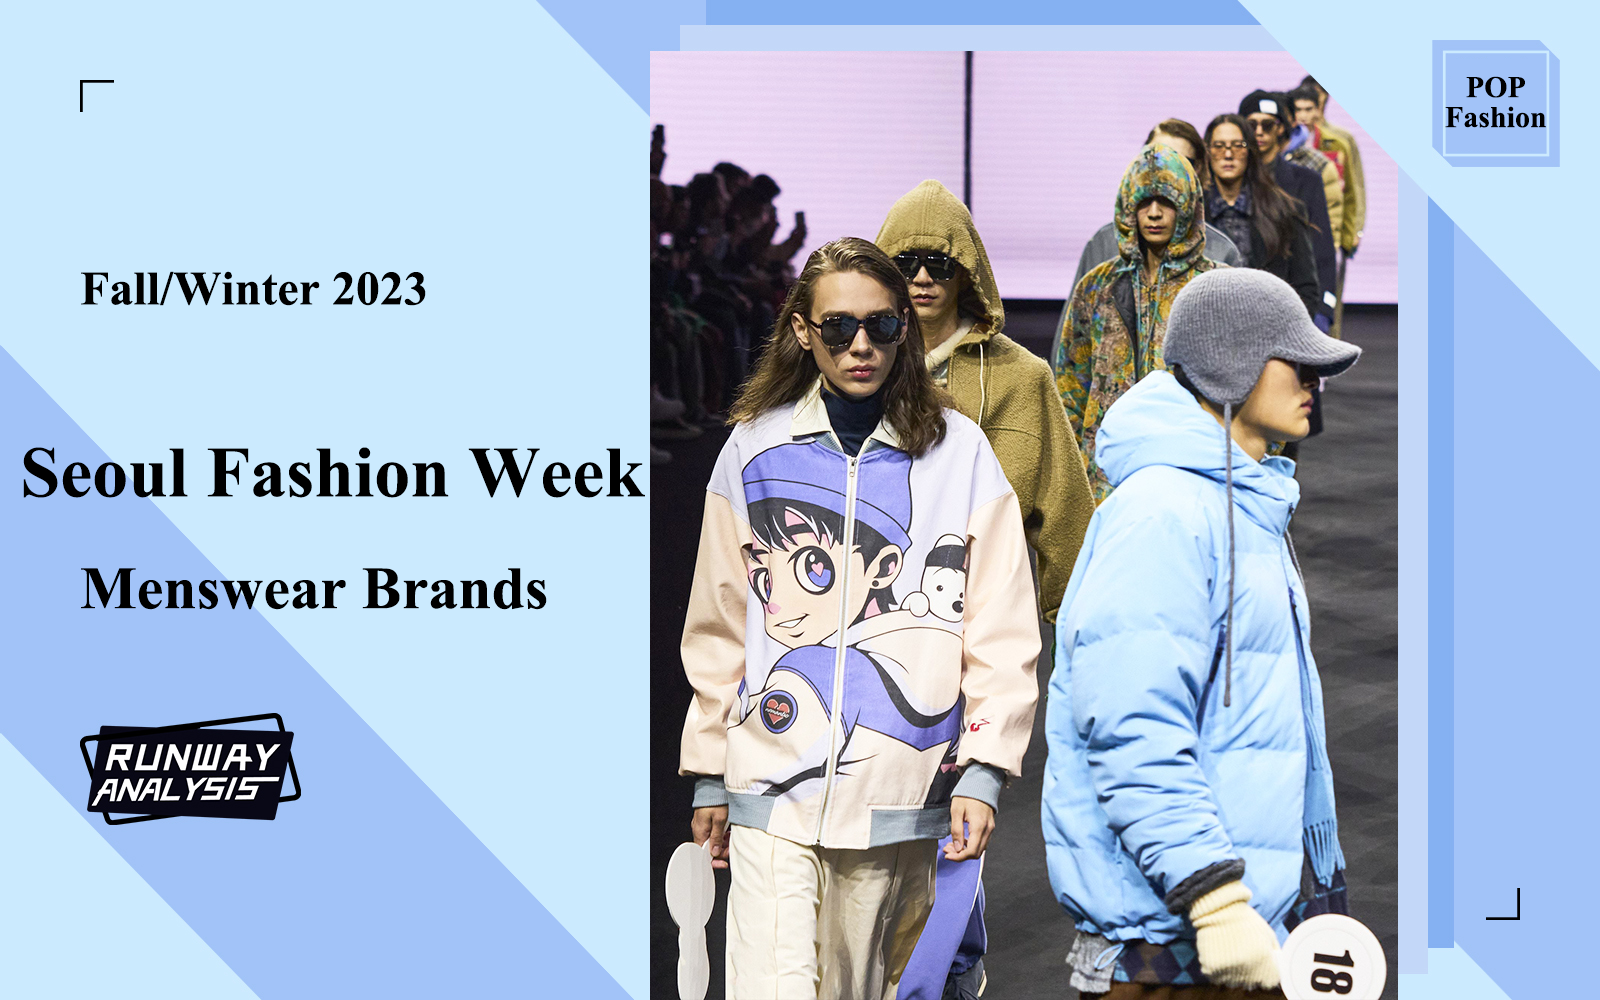 Seoul Fashion Week 2023: Recommended Menswear Brands